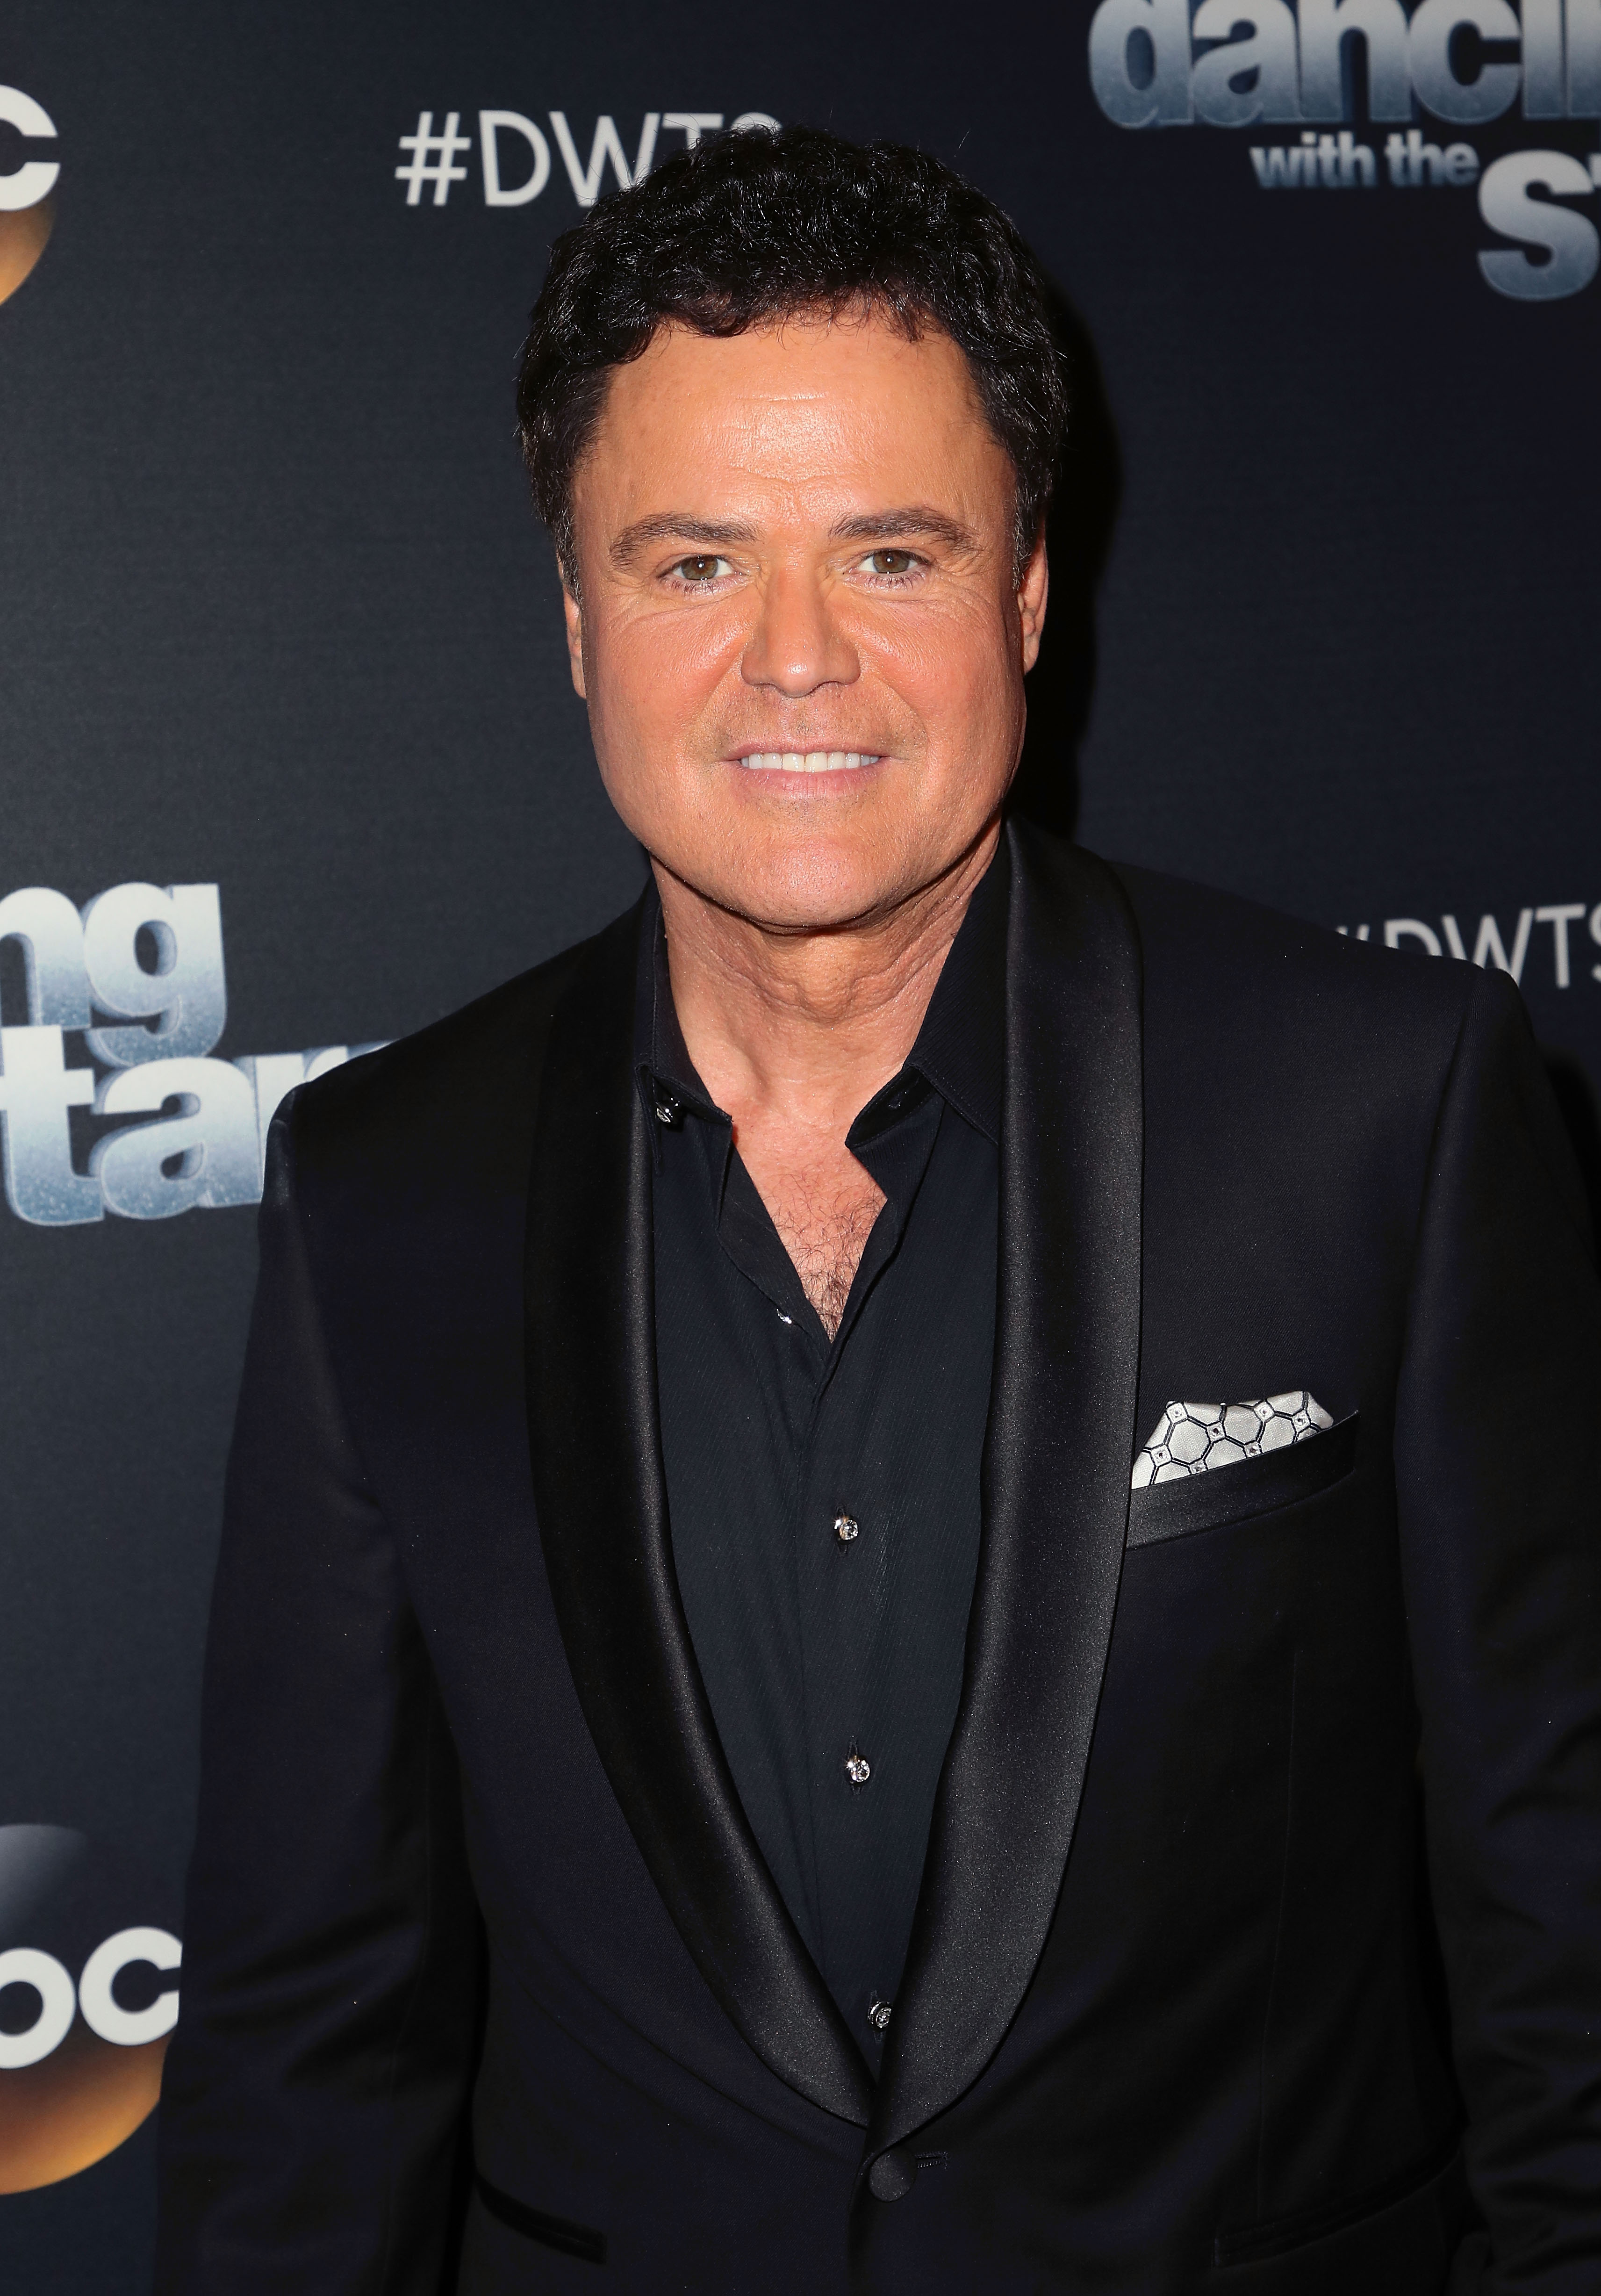 Donny Osmond pictured on the red carpet on "Dancing with the Stars," 2018, Los Angeles, California. | Photo: Getty Images